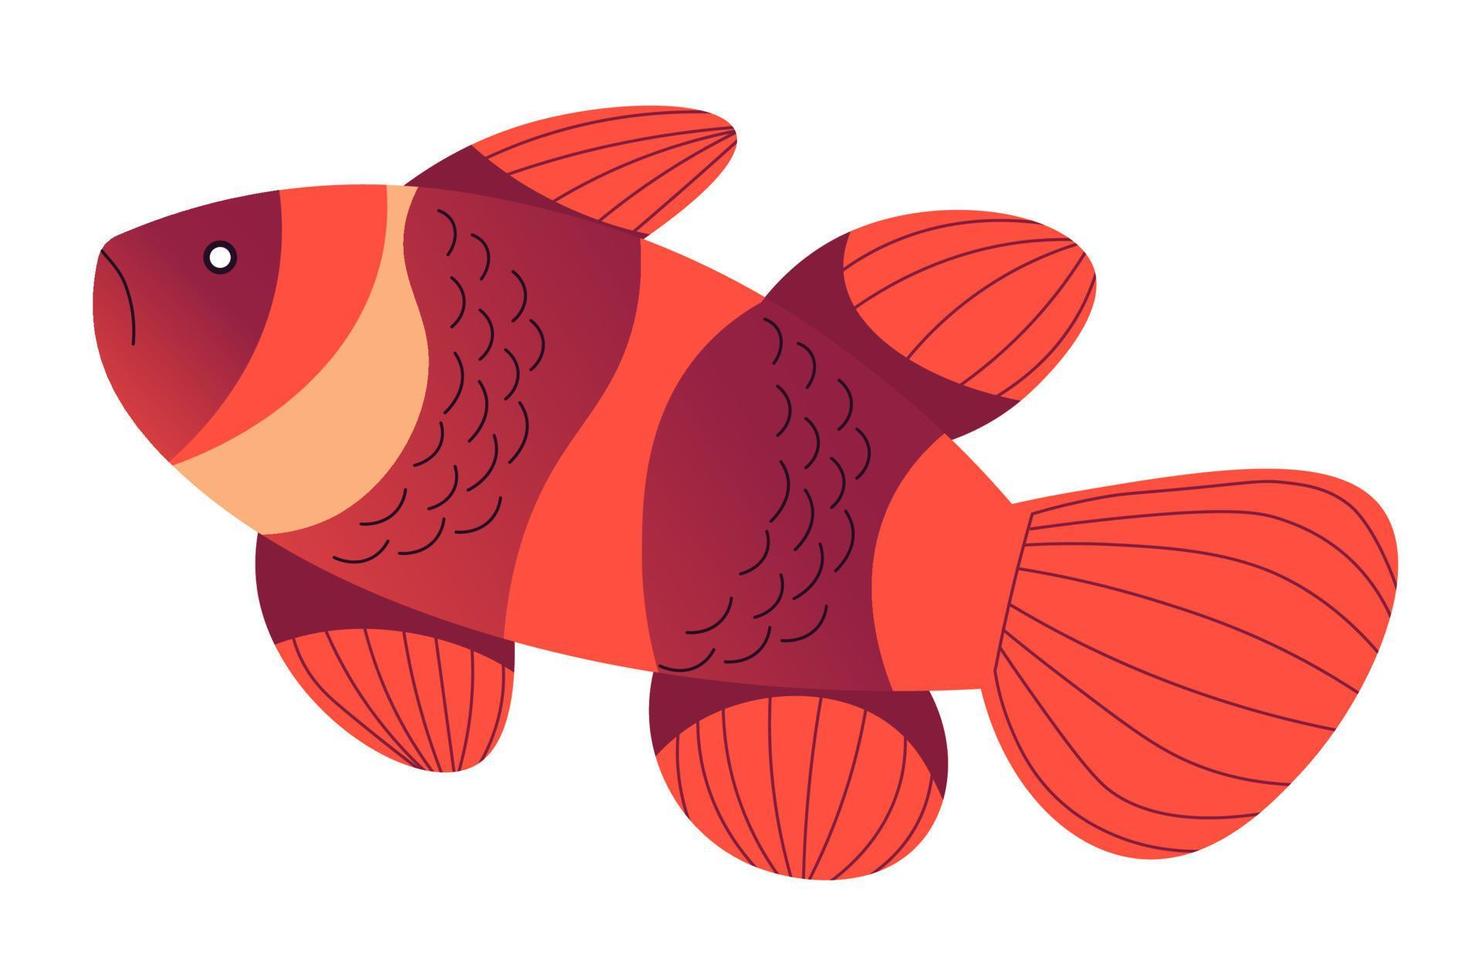 Tropical sea animal, goldfish with stripes vector